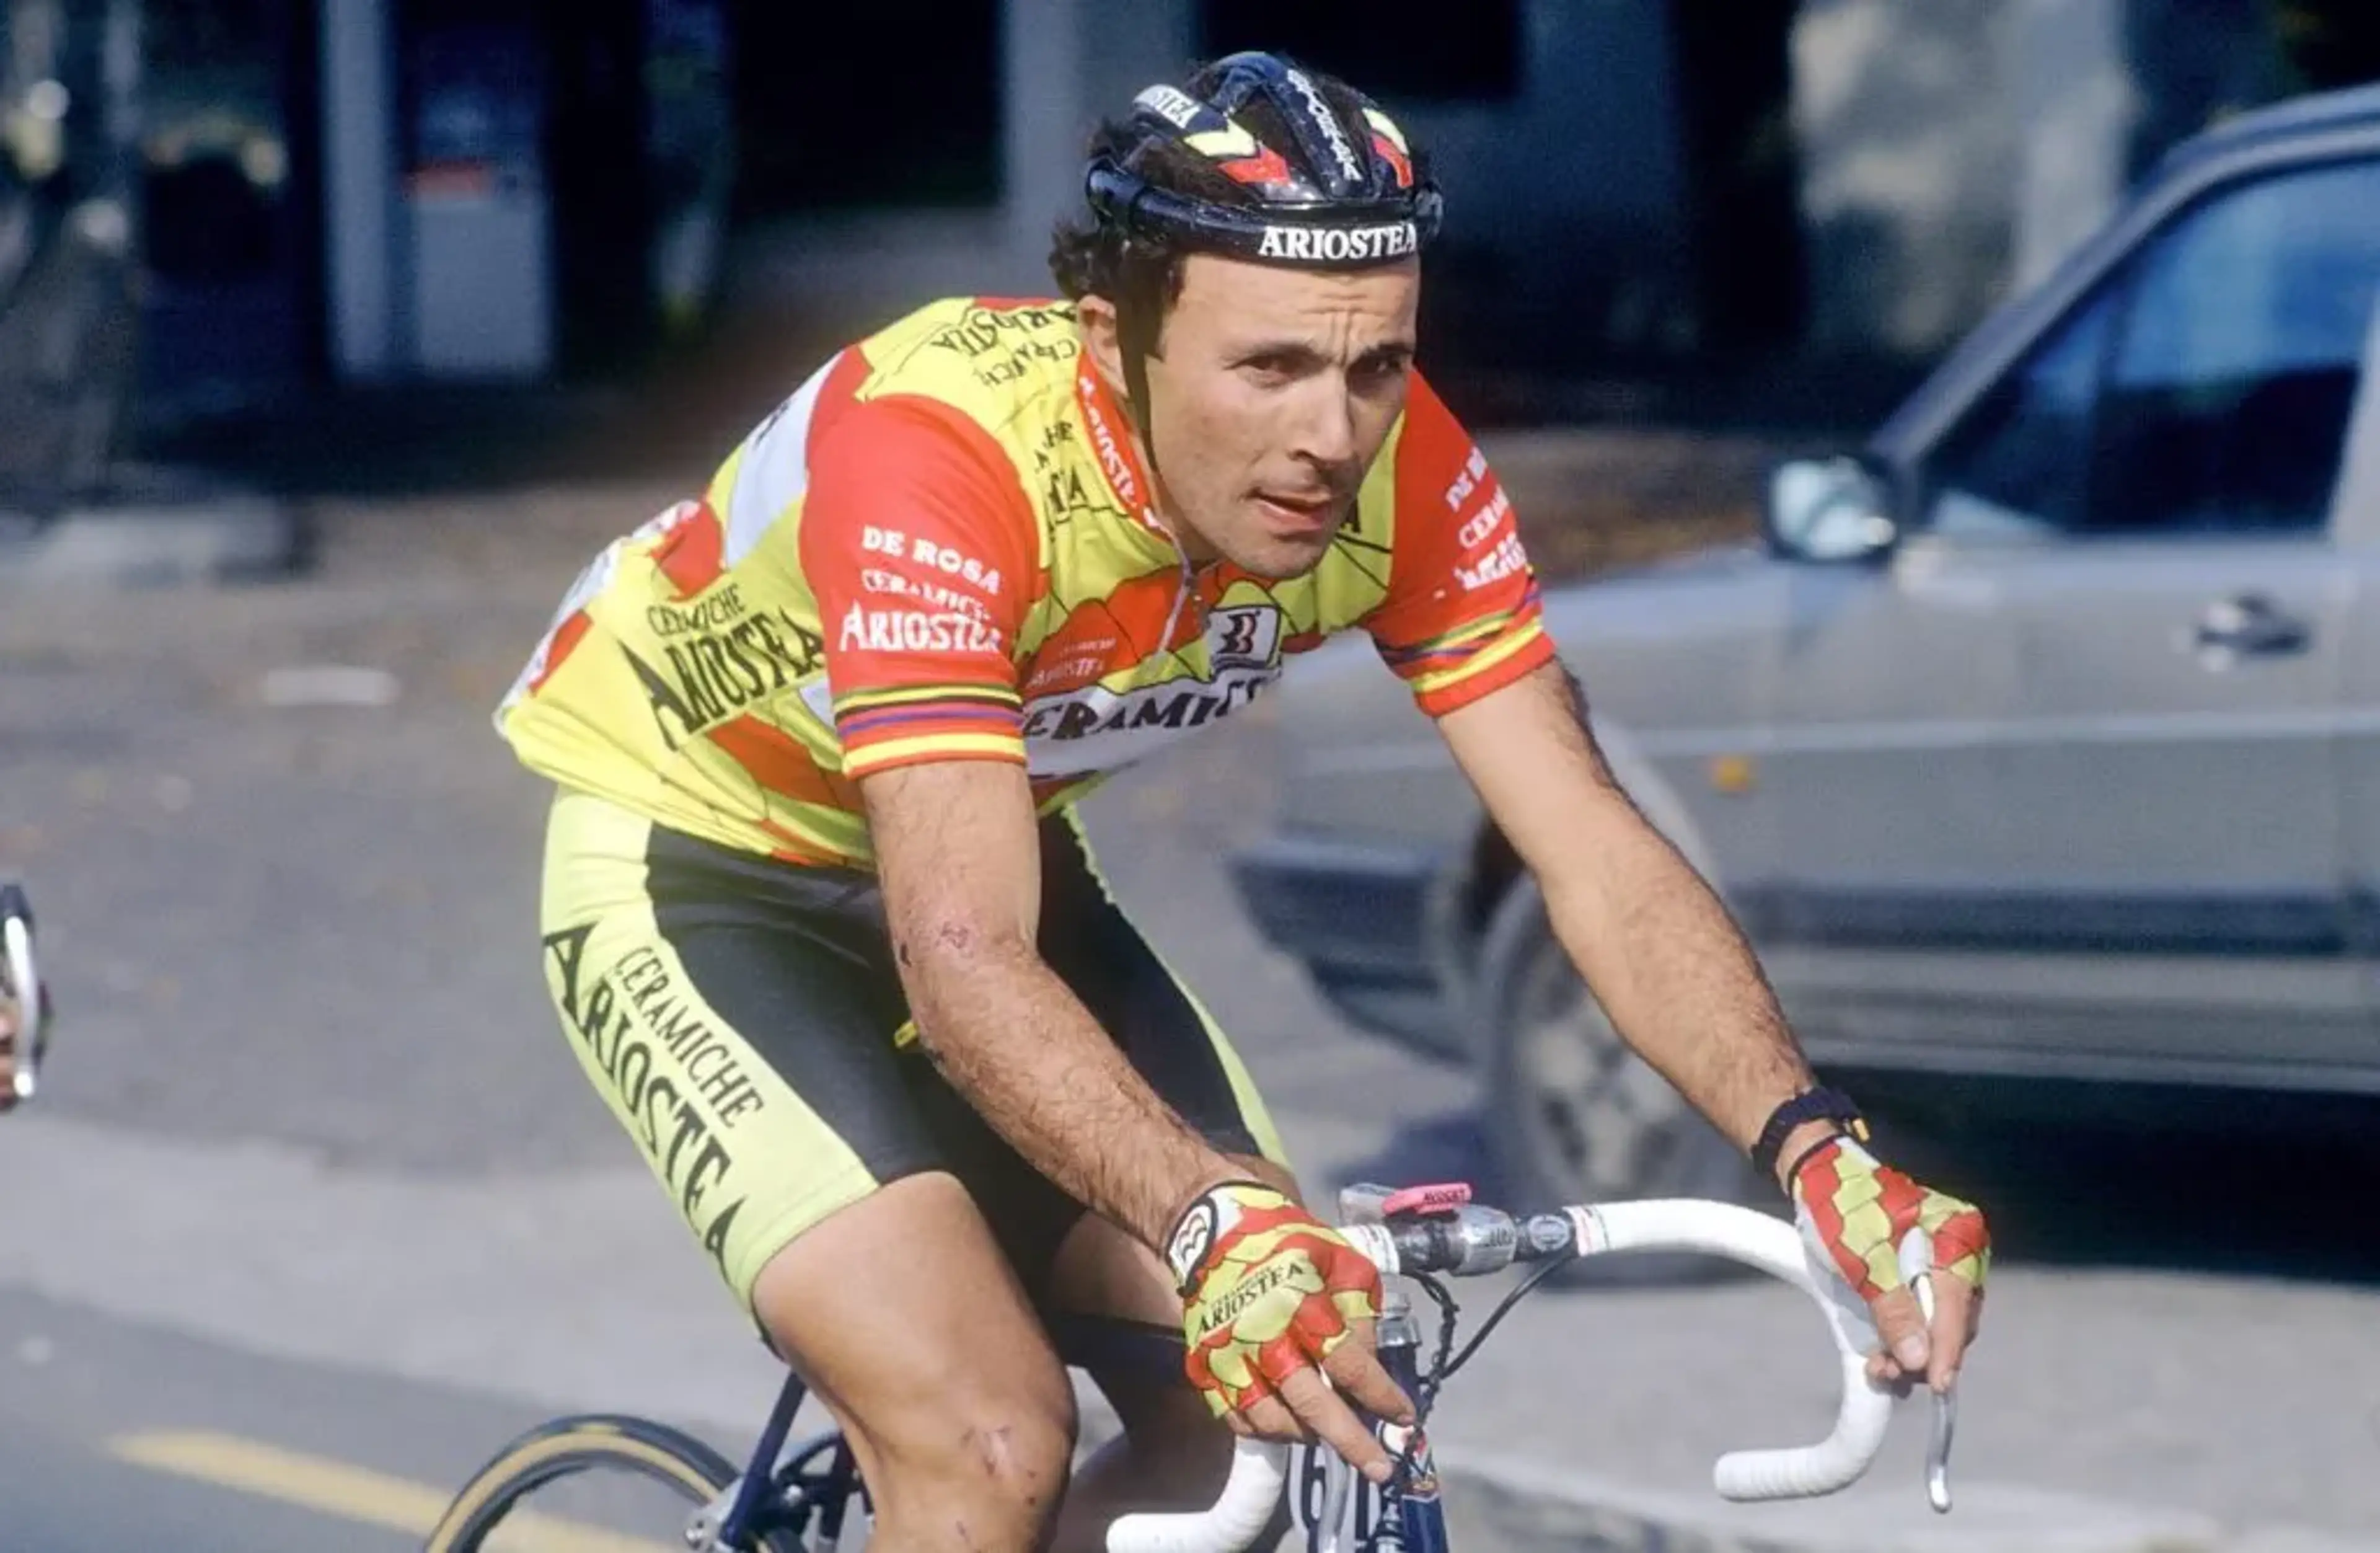 Argentin retired from competition in 1994 having won more than 100 professional races